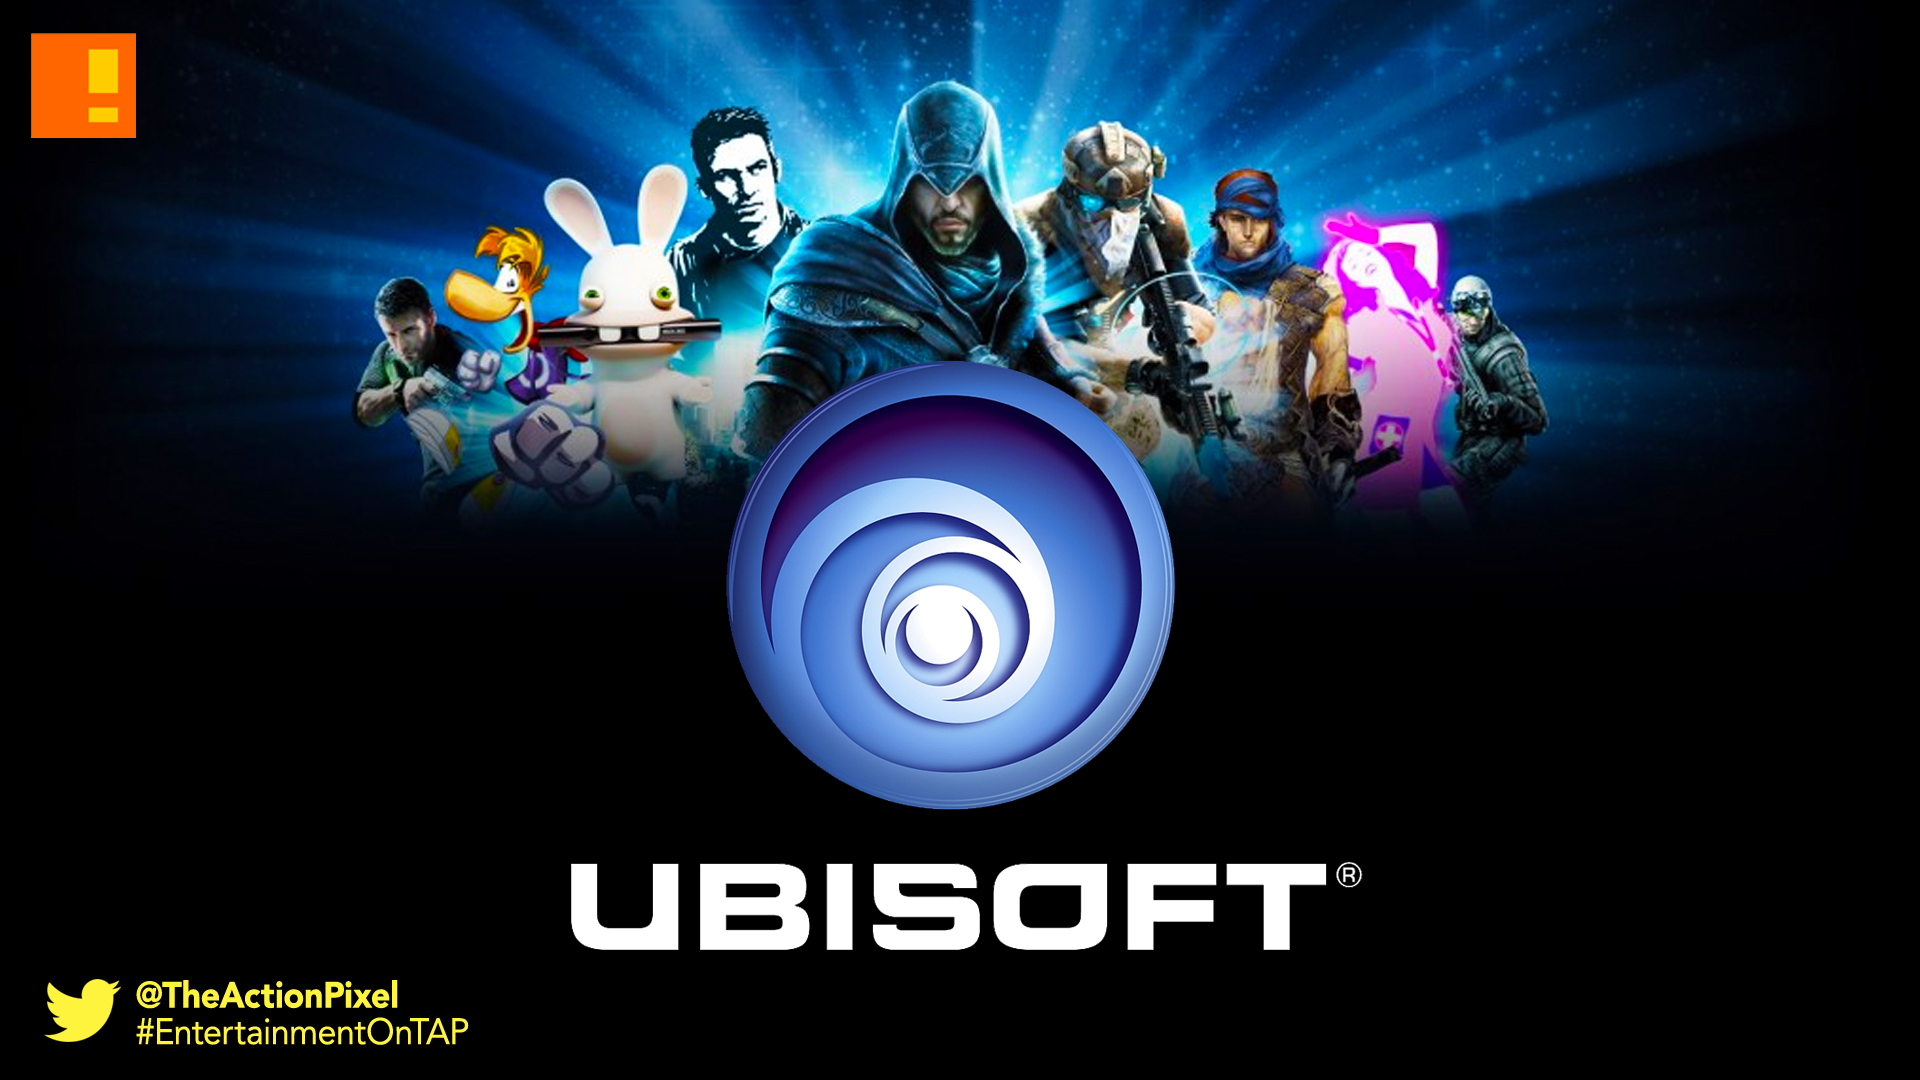 ubisoft, games, tom clancy, splinter cell, assassin's creed, watch dogs